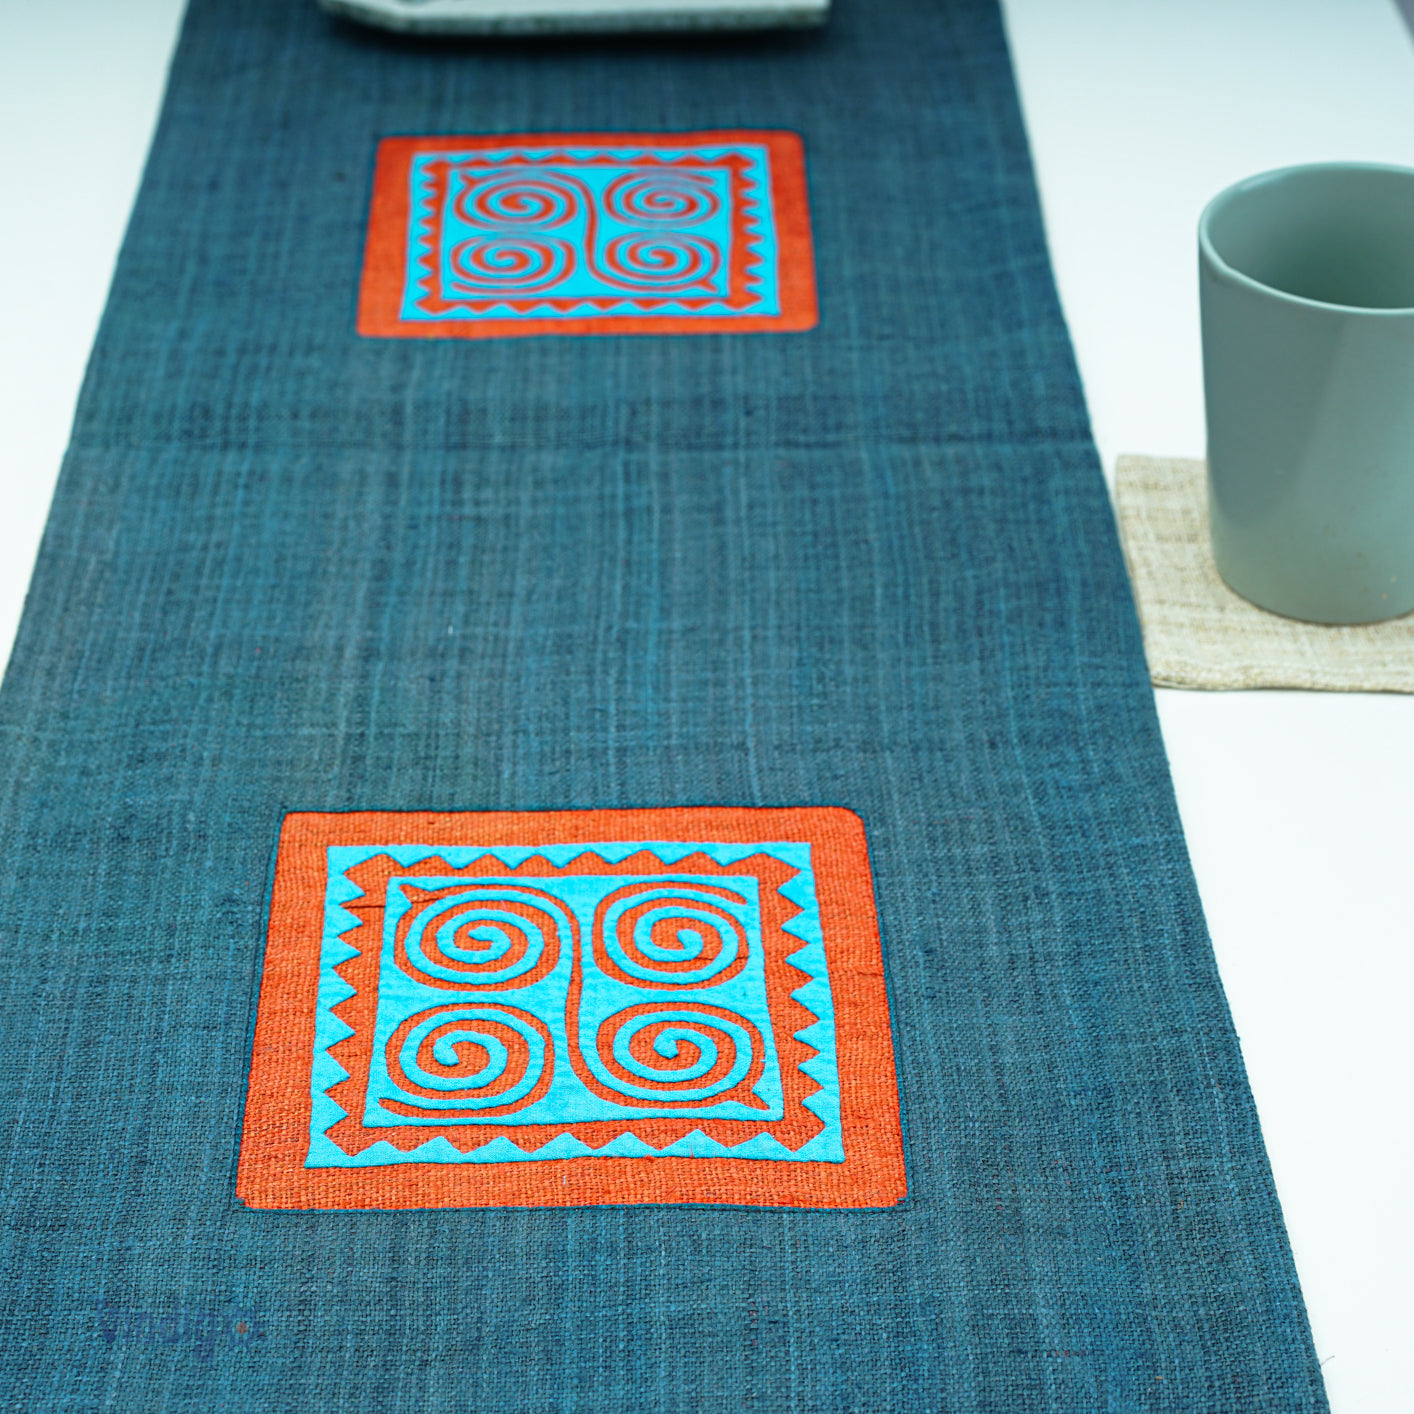 Indigo Blue Hemp Table Runner, hand-embroidered patch, hemp stripes in different colors